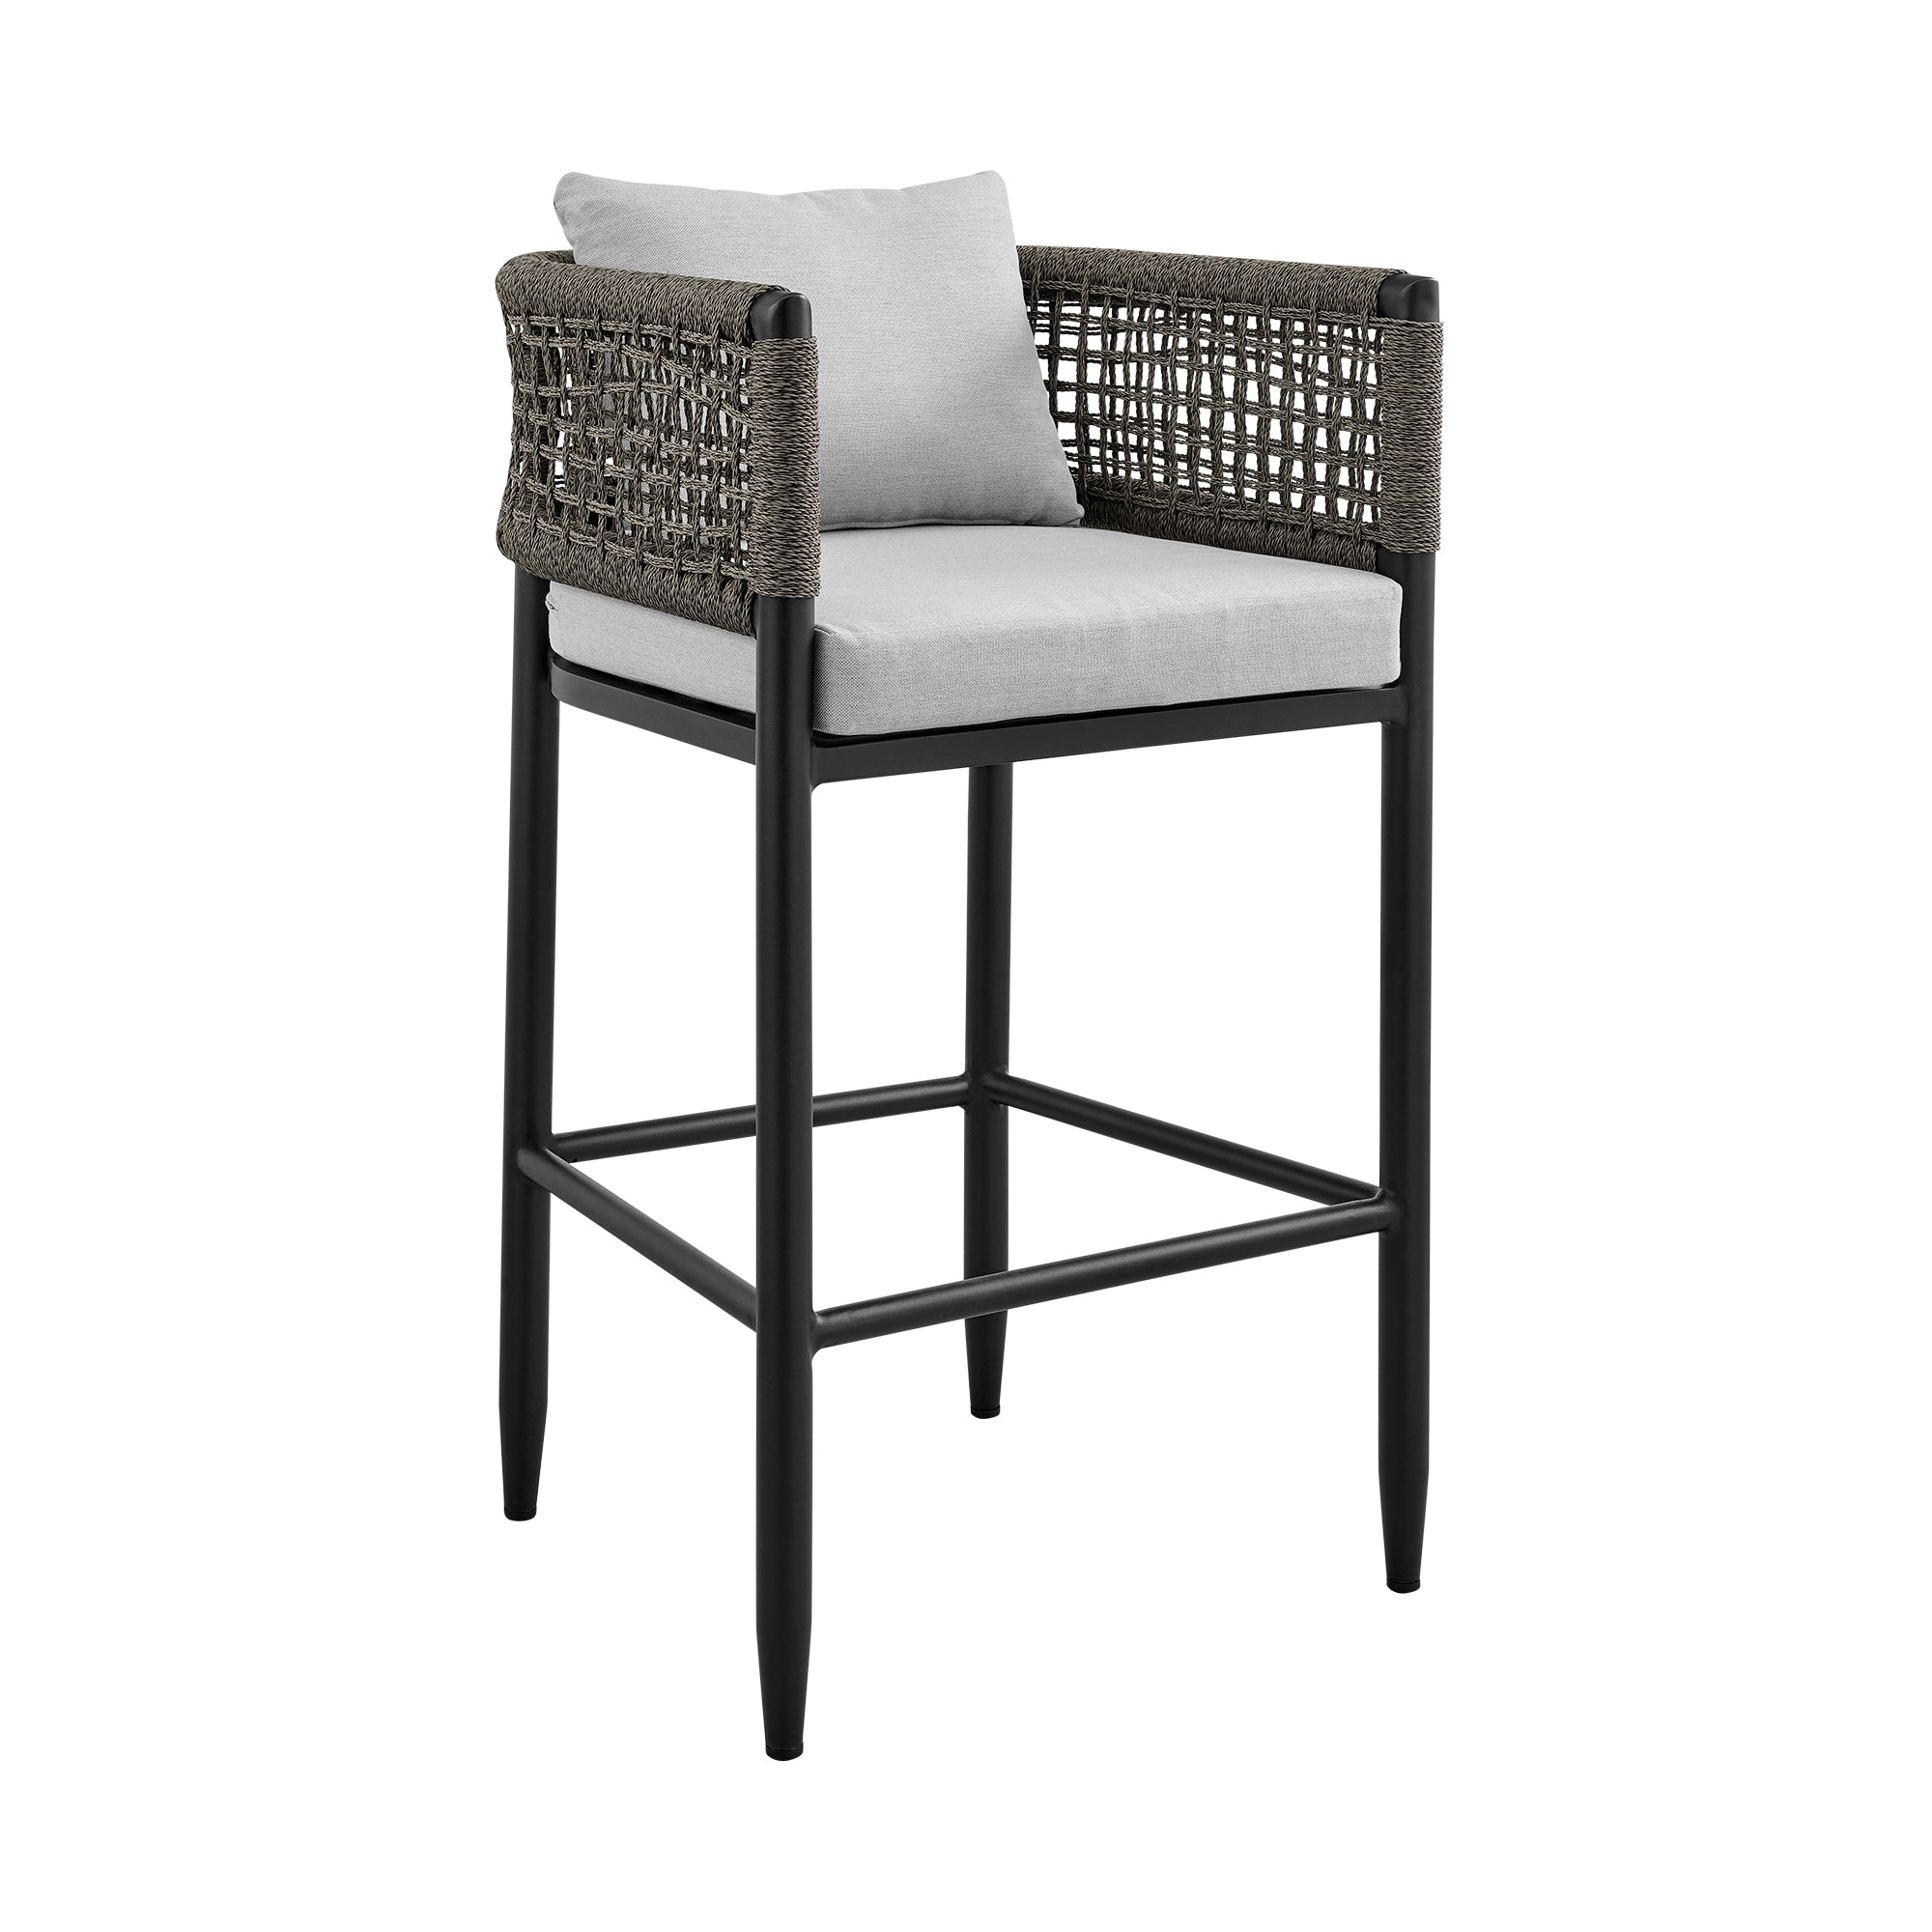 Armen Living - Felicia Outdoor Patio Counter or Bar Height Bar Stool in Aluminum with Grey Rope and Cushions - 840254333109